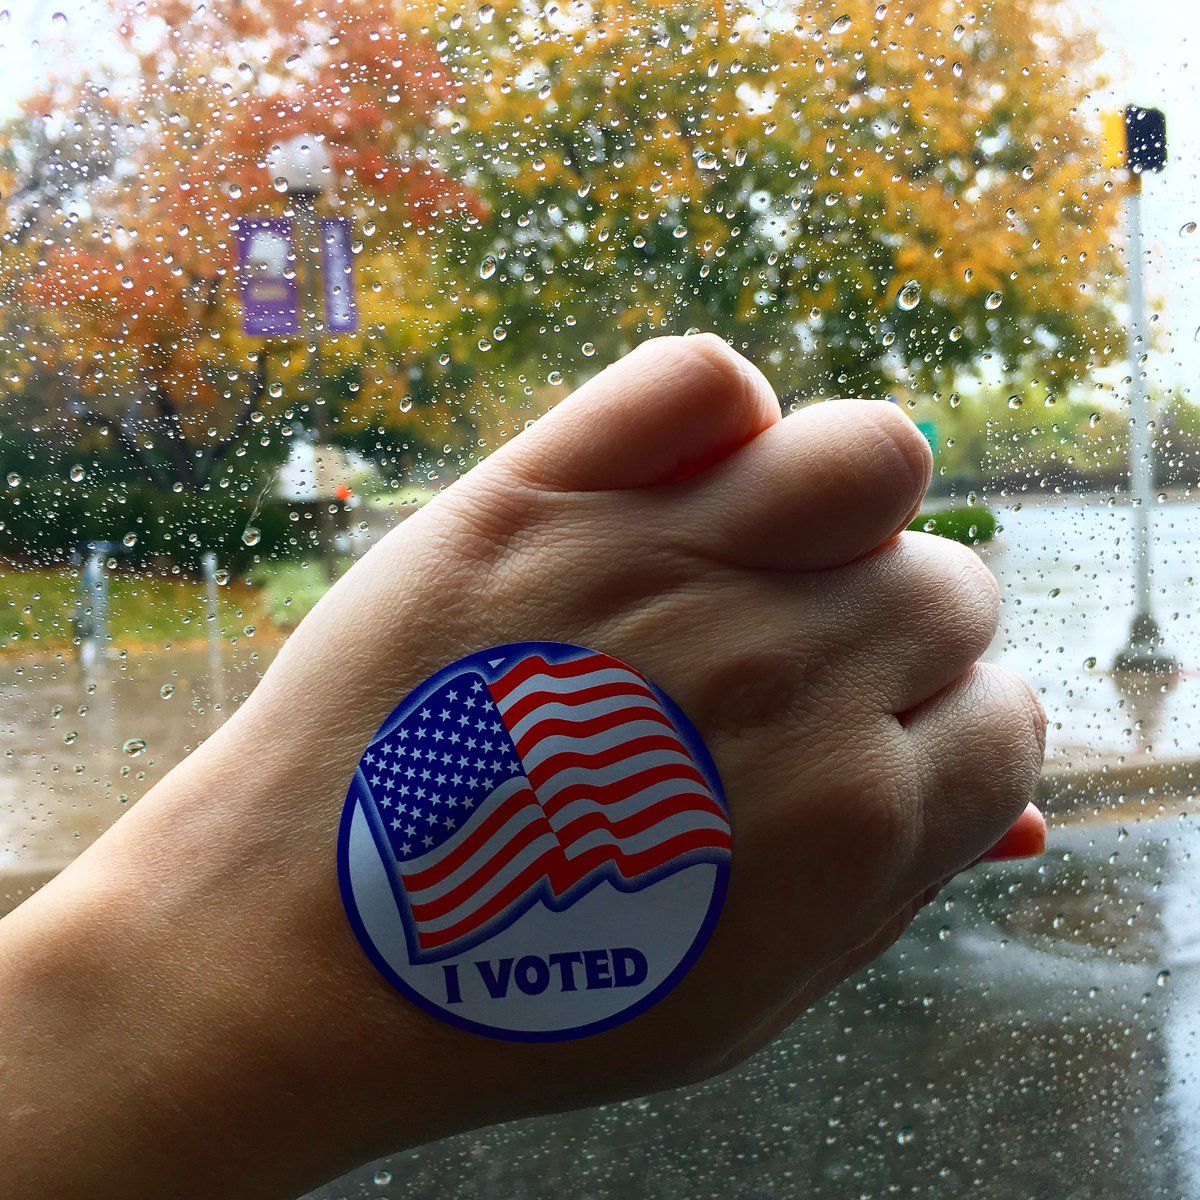 Twitter user @nura_hamideh shows off her sticker after she voted for Ralph Northam. (Courtesy @nura_hamideh/Twitter) 